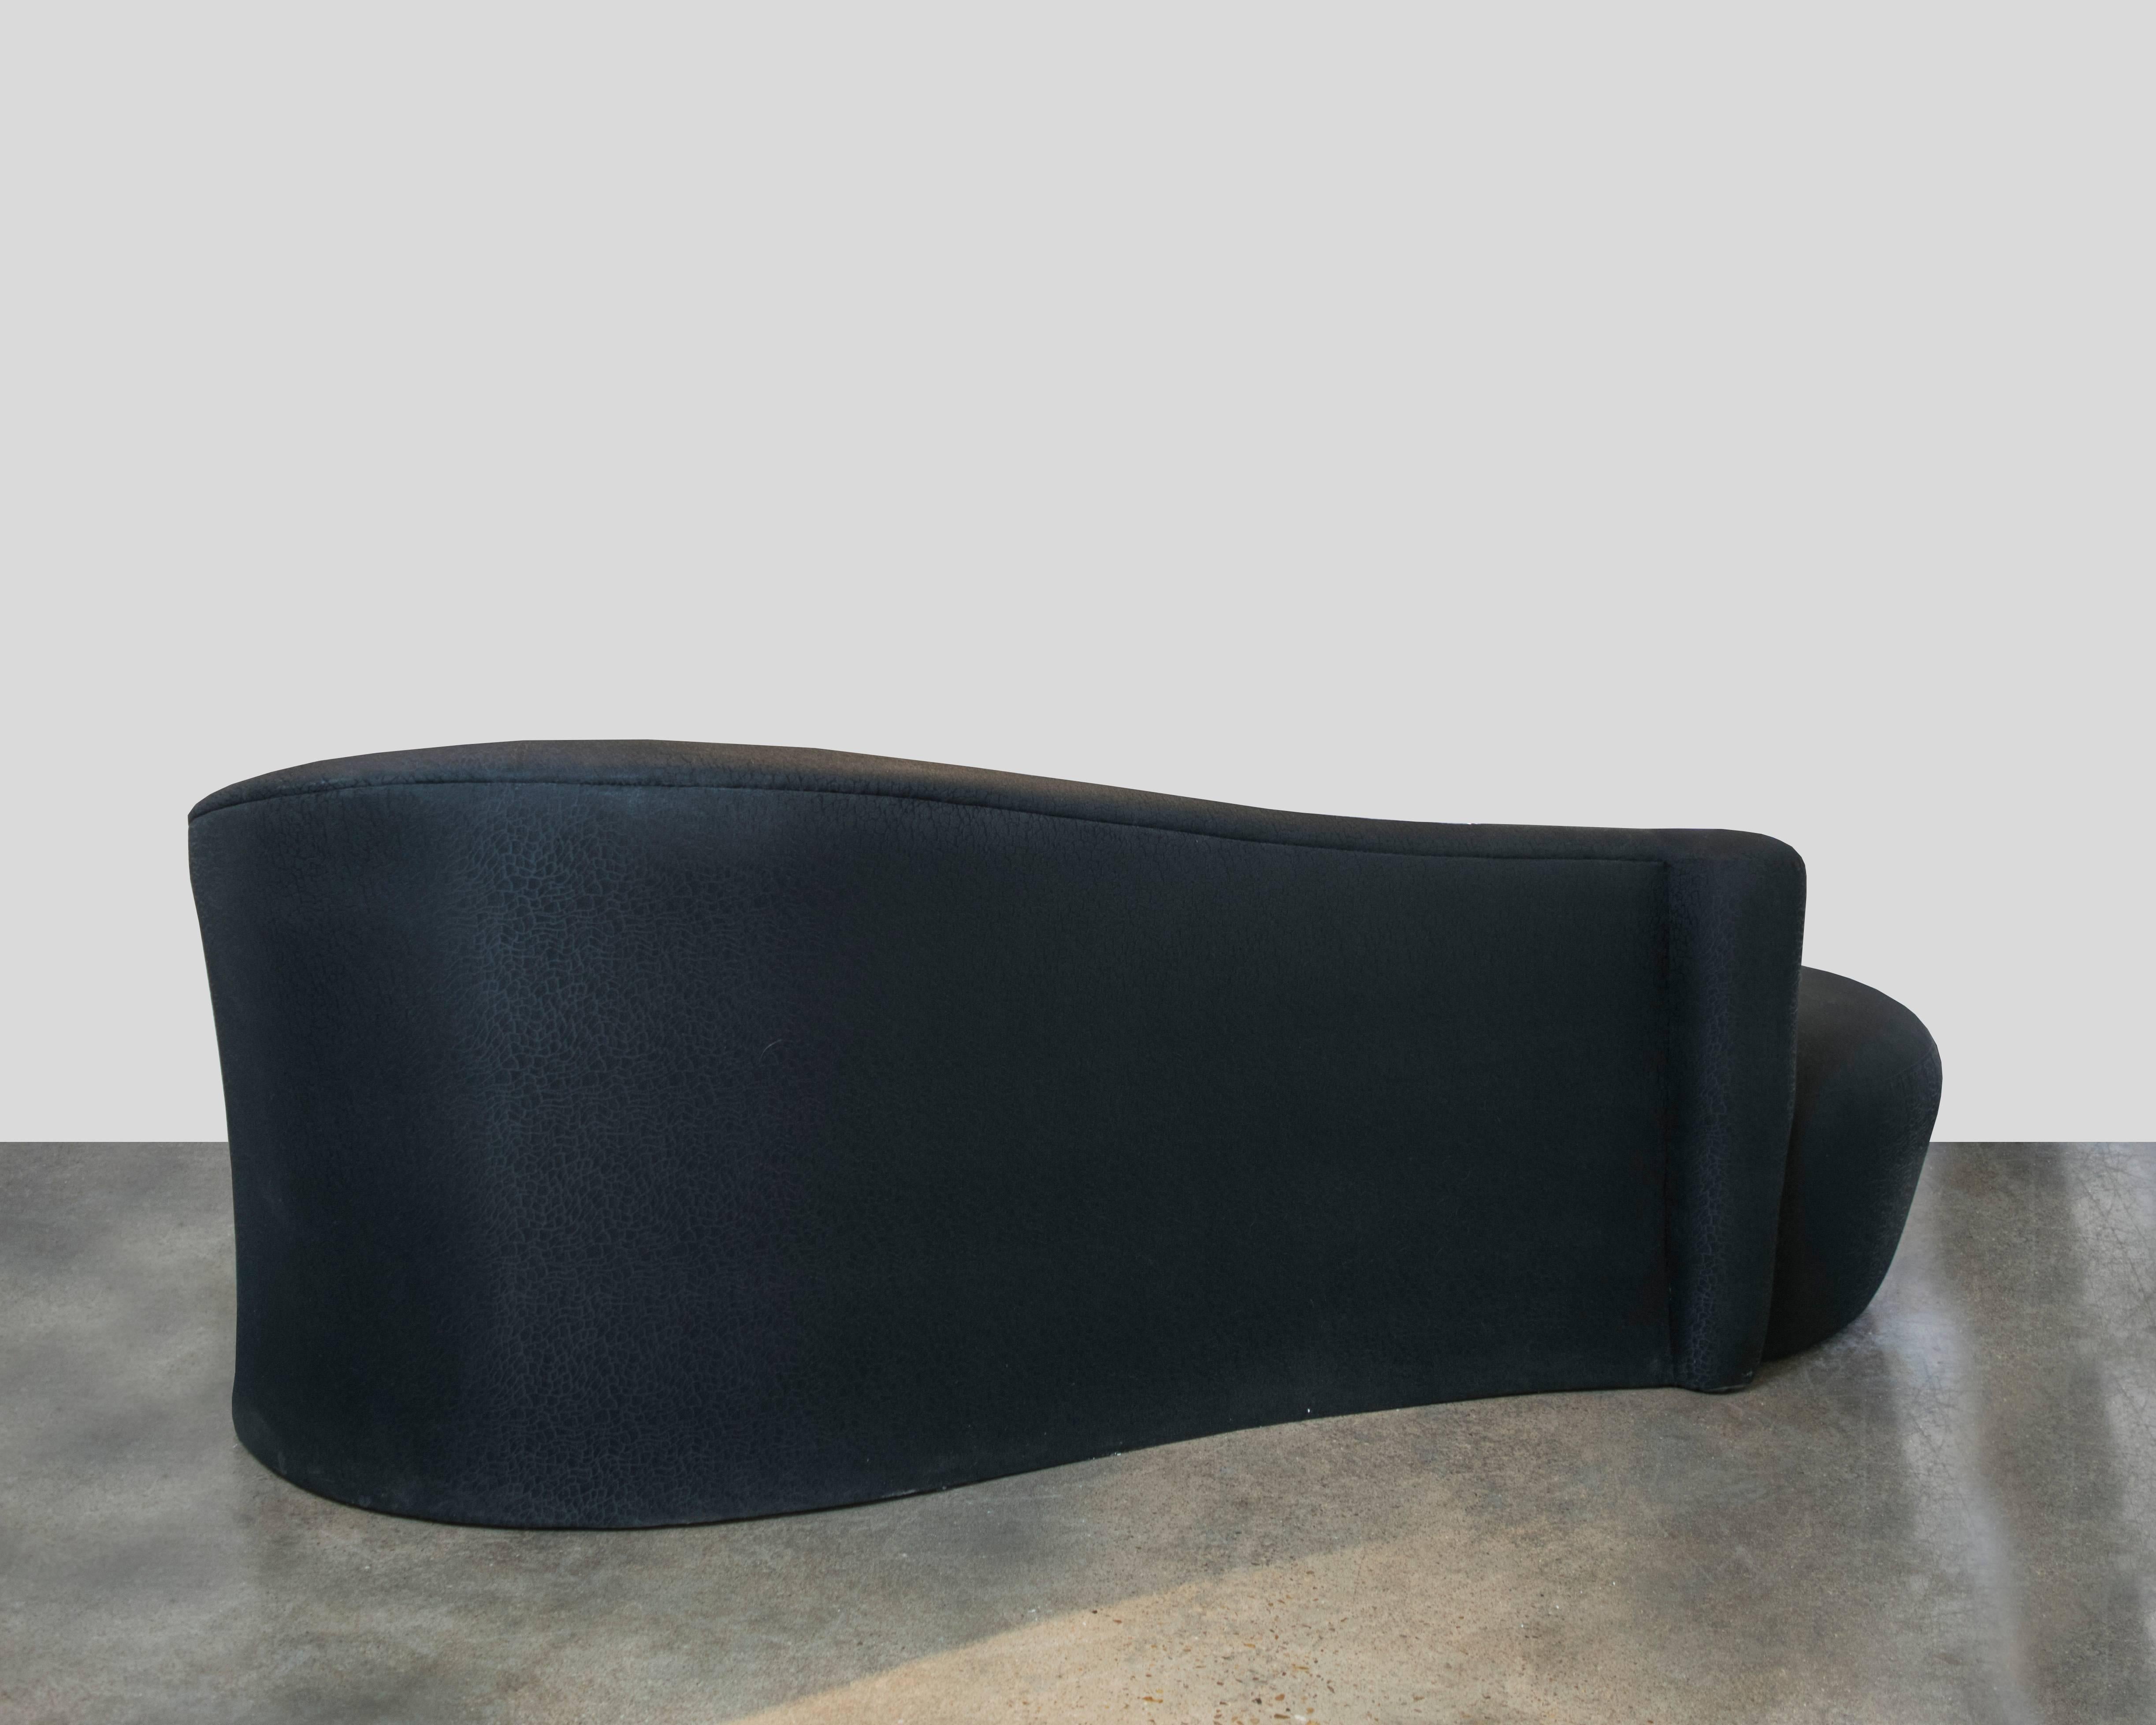 American Sensuous Black Serpentine Sofa with Lucite Leg in the Style of Vladimir Kagan For Sale